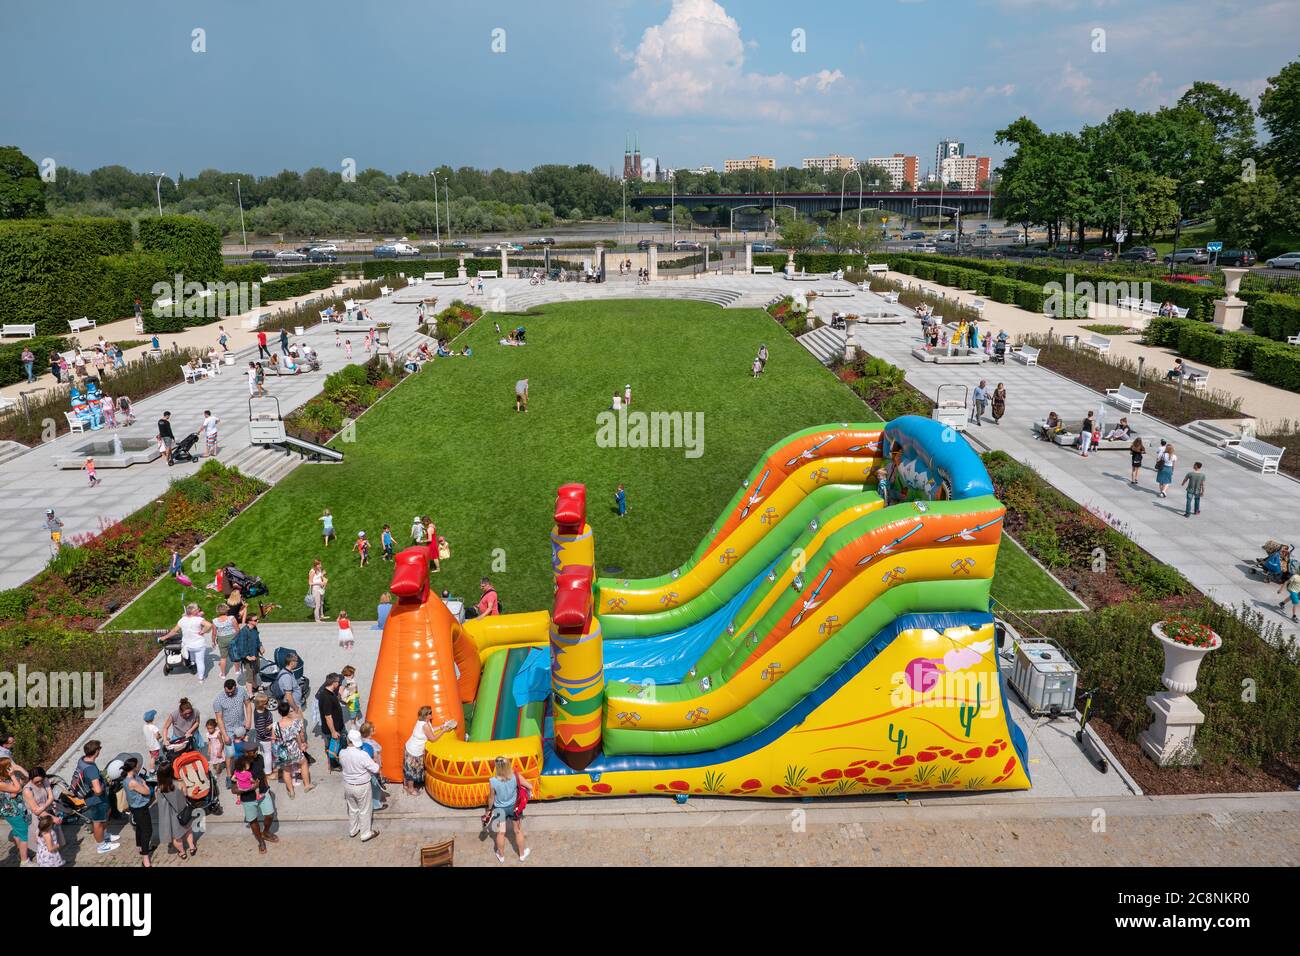 WARSAW, POLAND - JUNE 2, 2019: People with little children, kids playing and having fun at huge inflatable slide in gardens of the Royal Castle Stock Photo